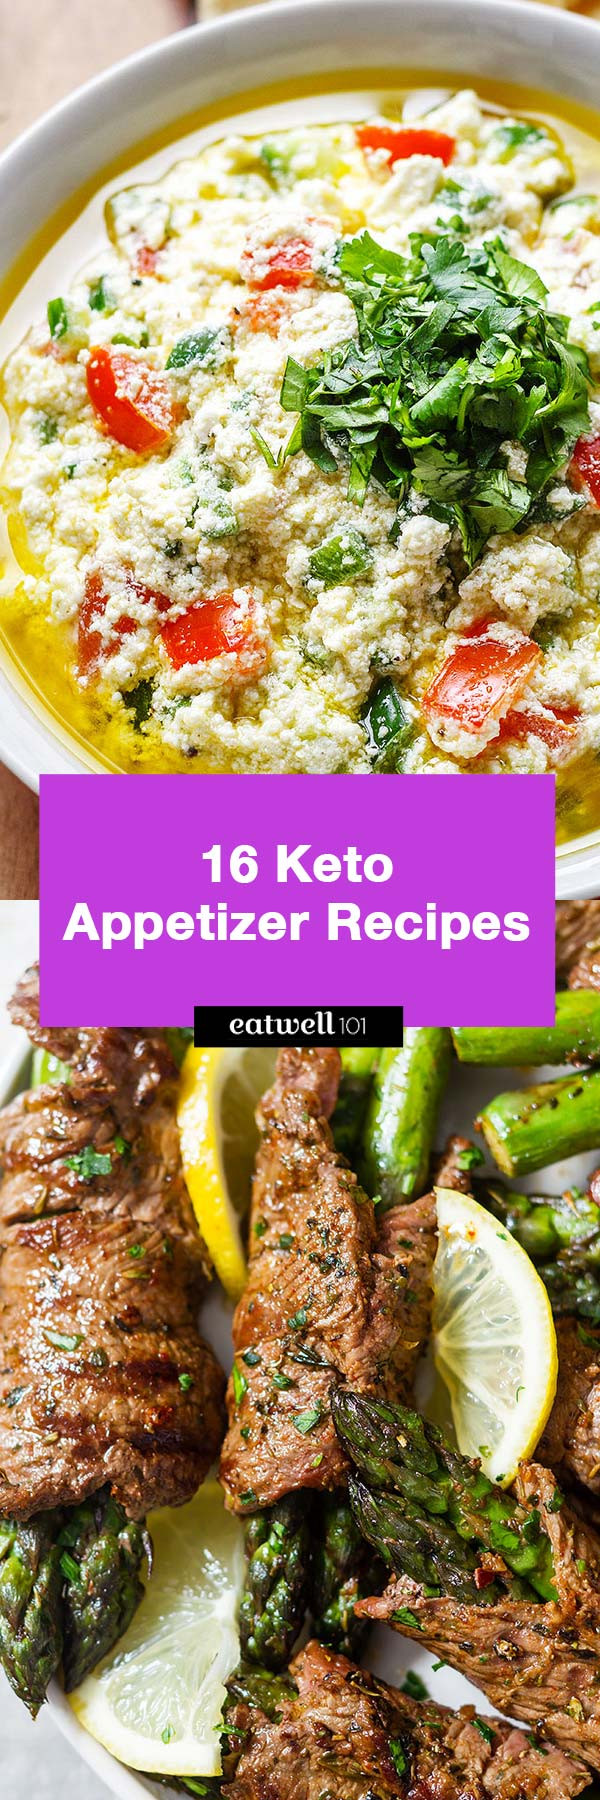 Summer Keto Appetizers
 Keto Appetizer Recipes – 16 Keto Appetizers Perfect for a